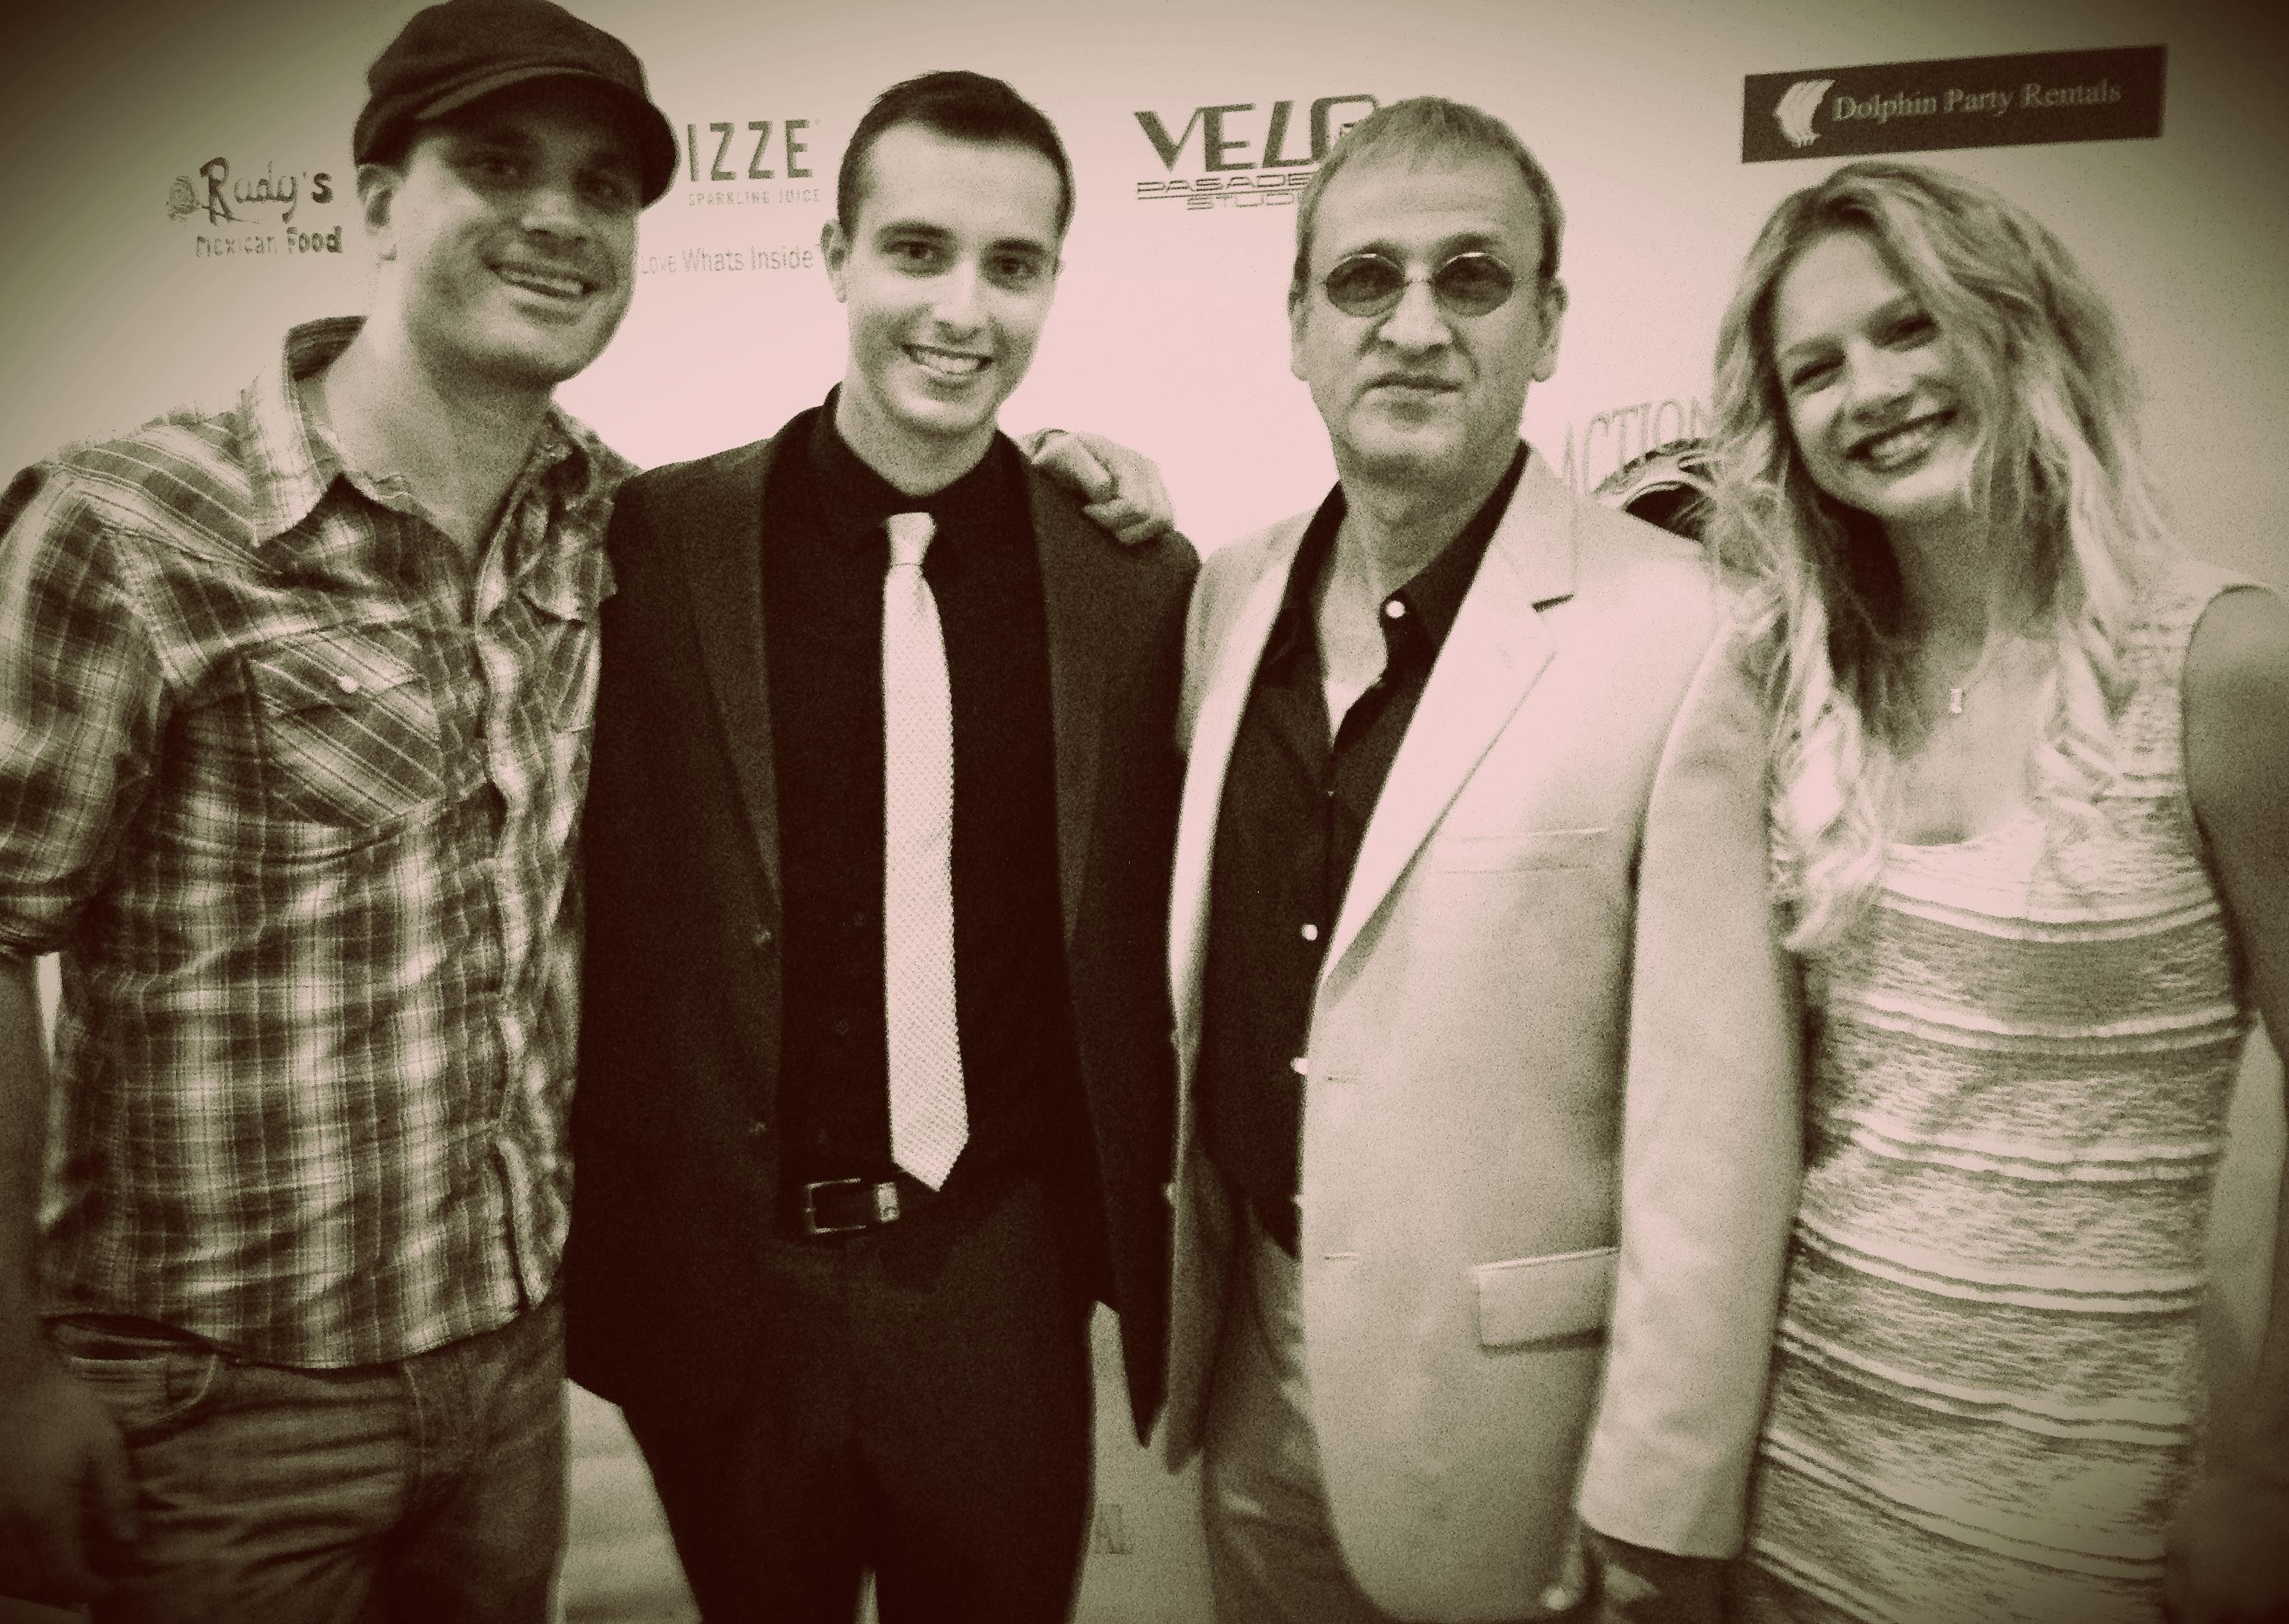 2013 Action on Film Awards with Eddy Salazar, Oliver Pigott and Ursula Maria